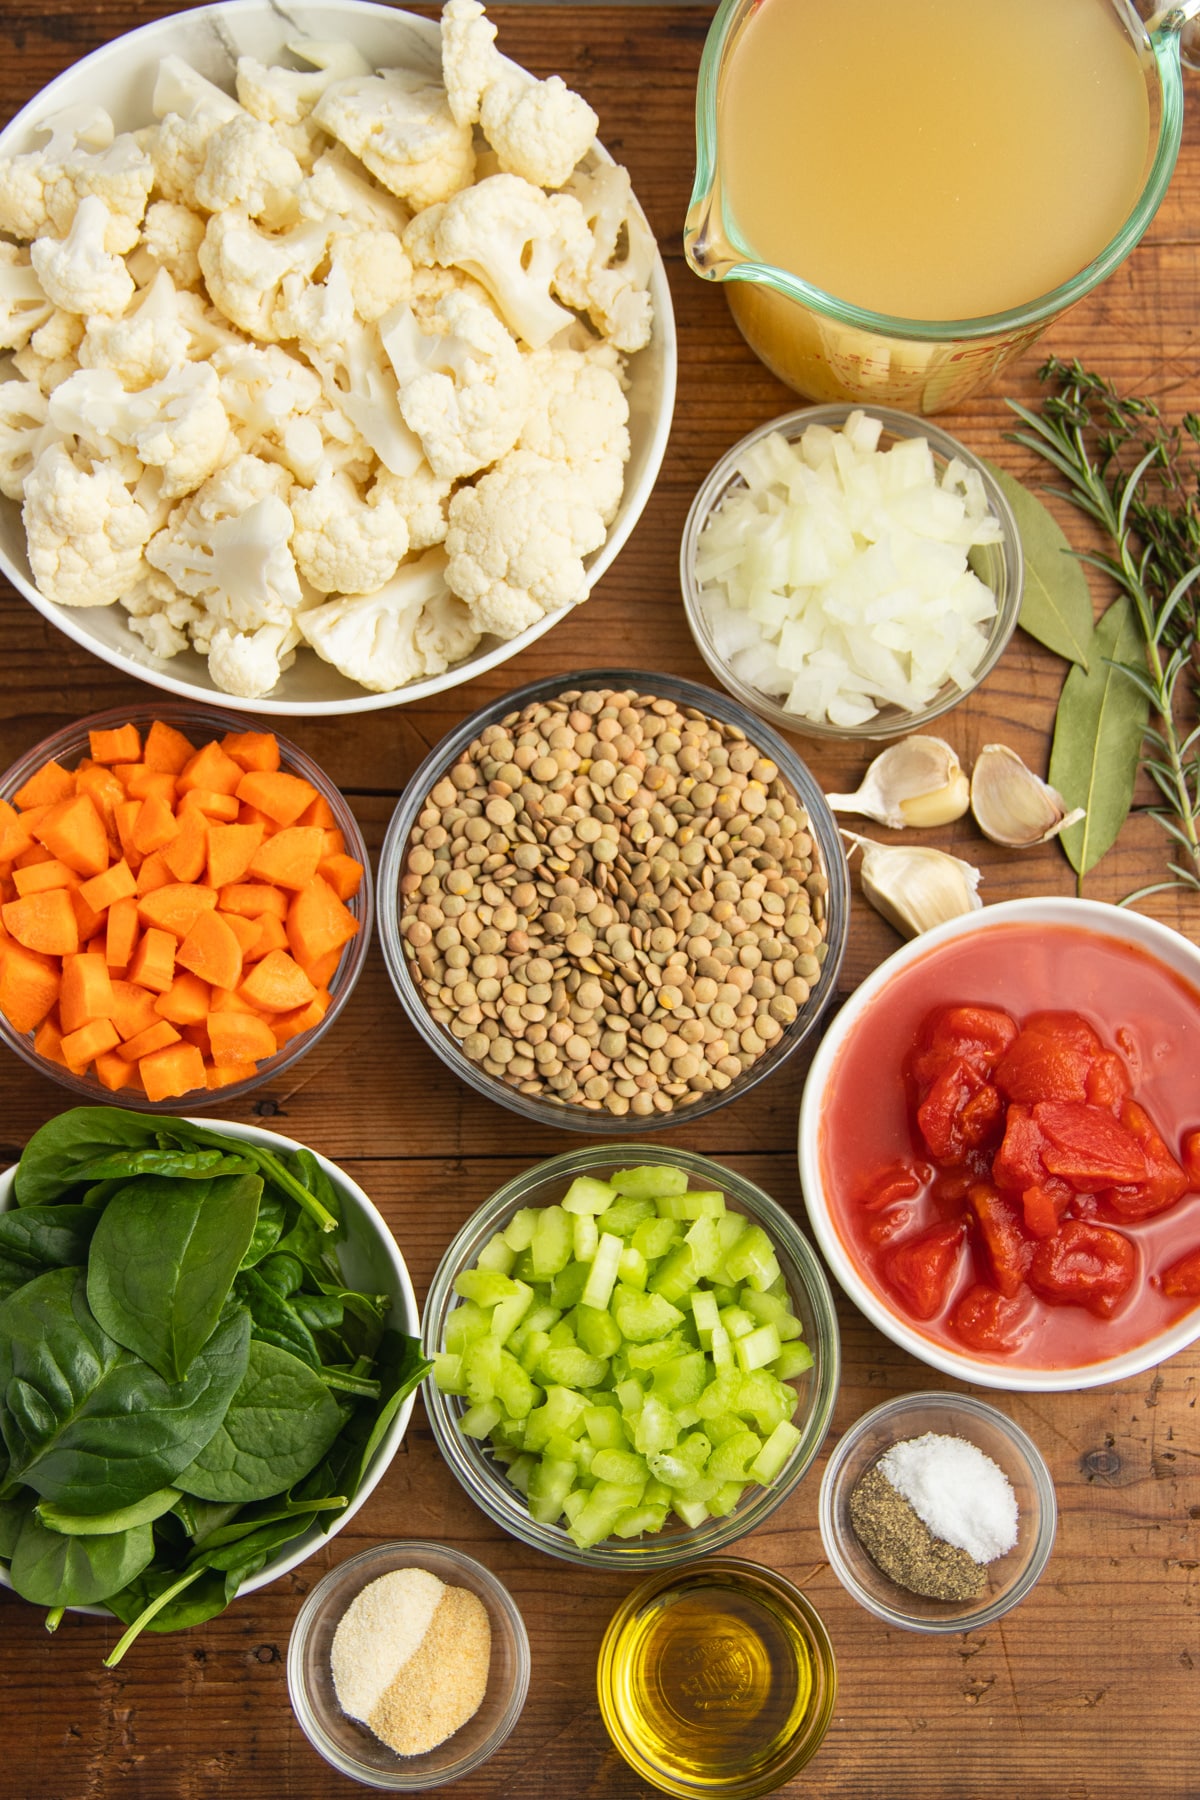 This is a picture of all the ingredients needed to make this soup recipe.